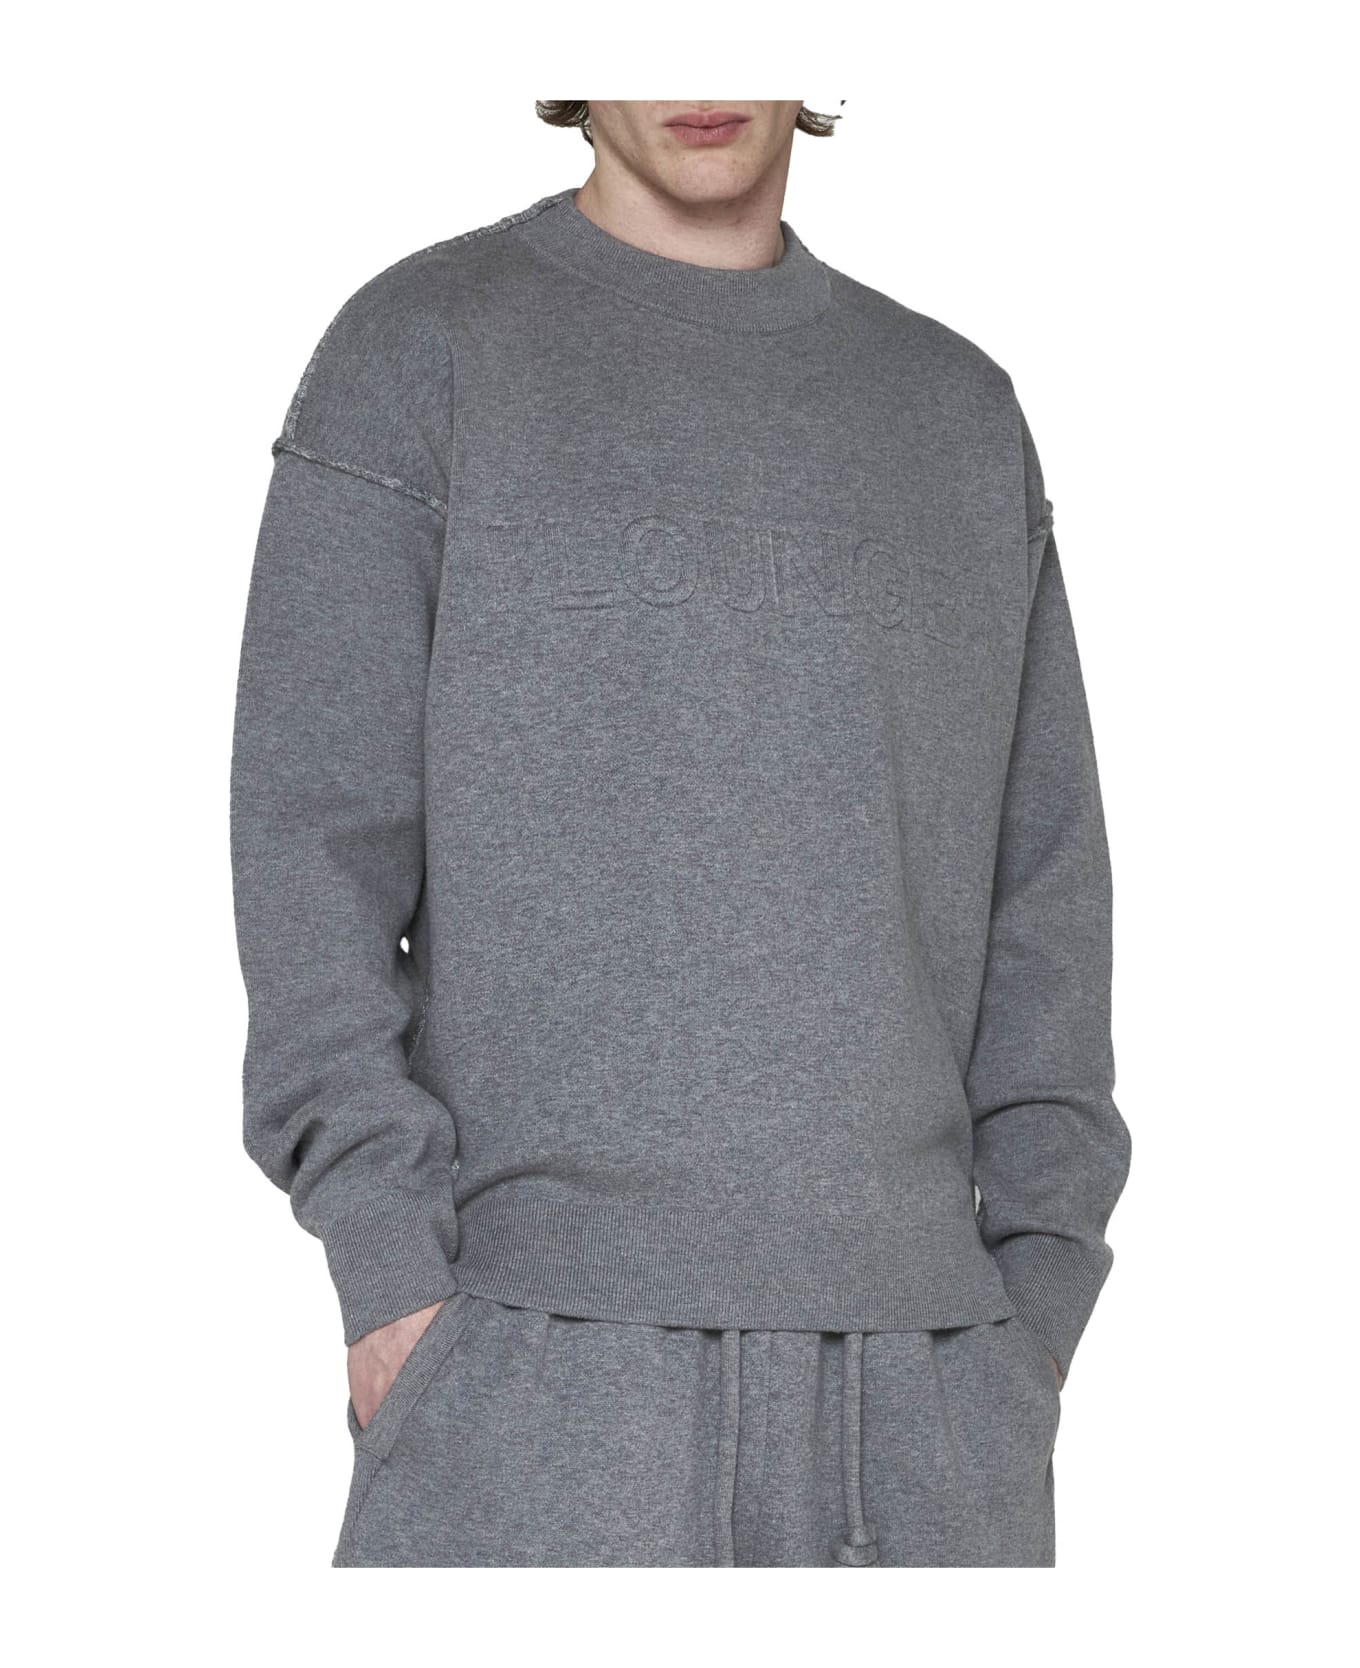 Off-White Knit Cotton Blend Pullover - grey